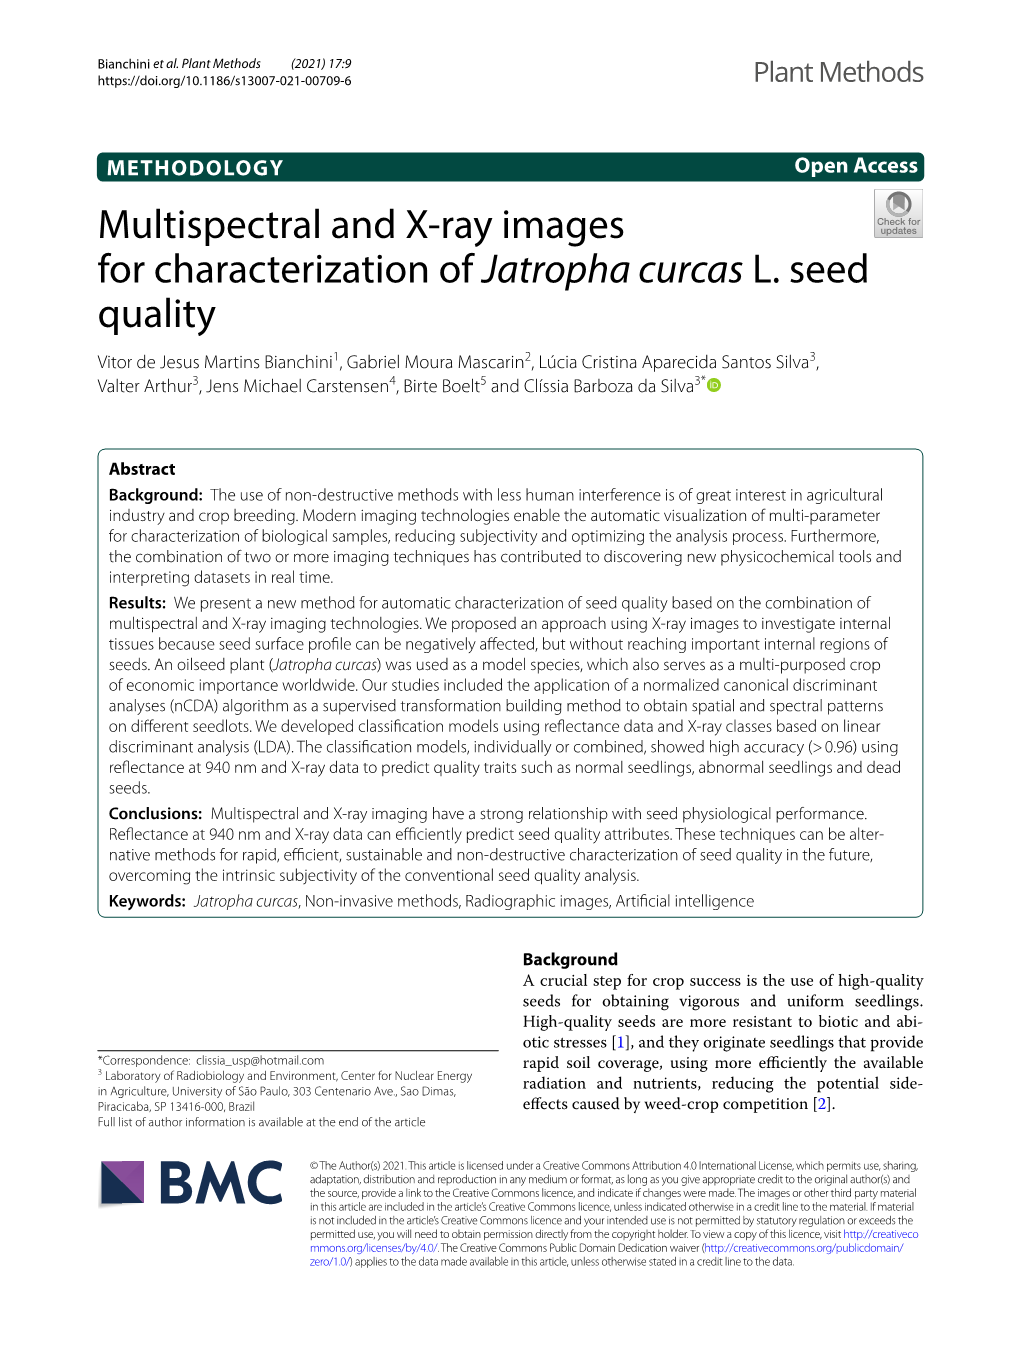 Multispectral and X-Ray Images for Characterization of Jatropha Curcas